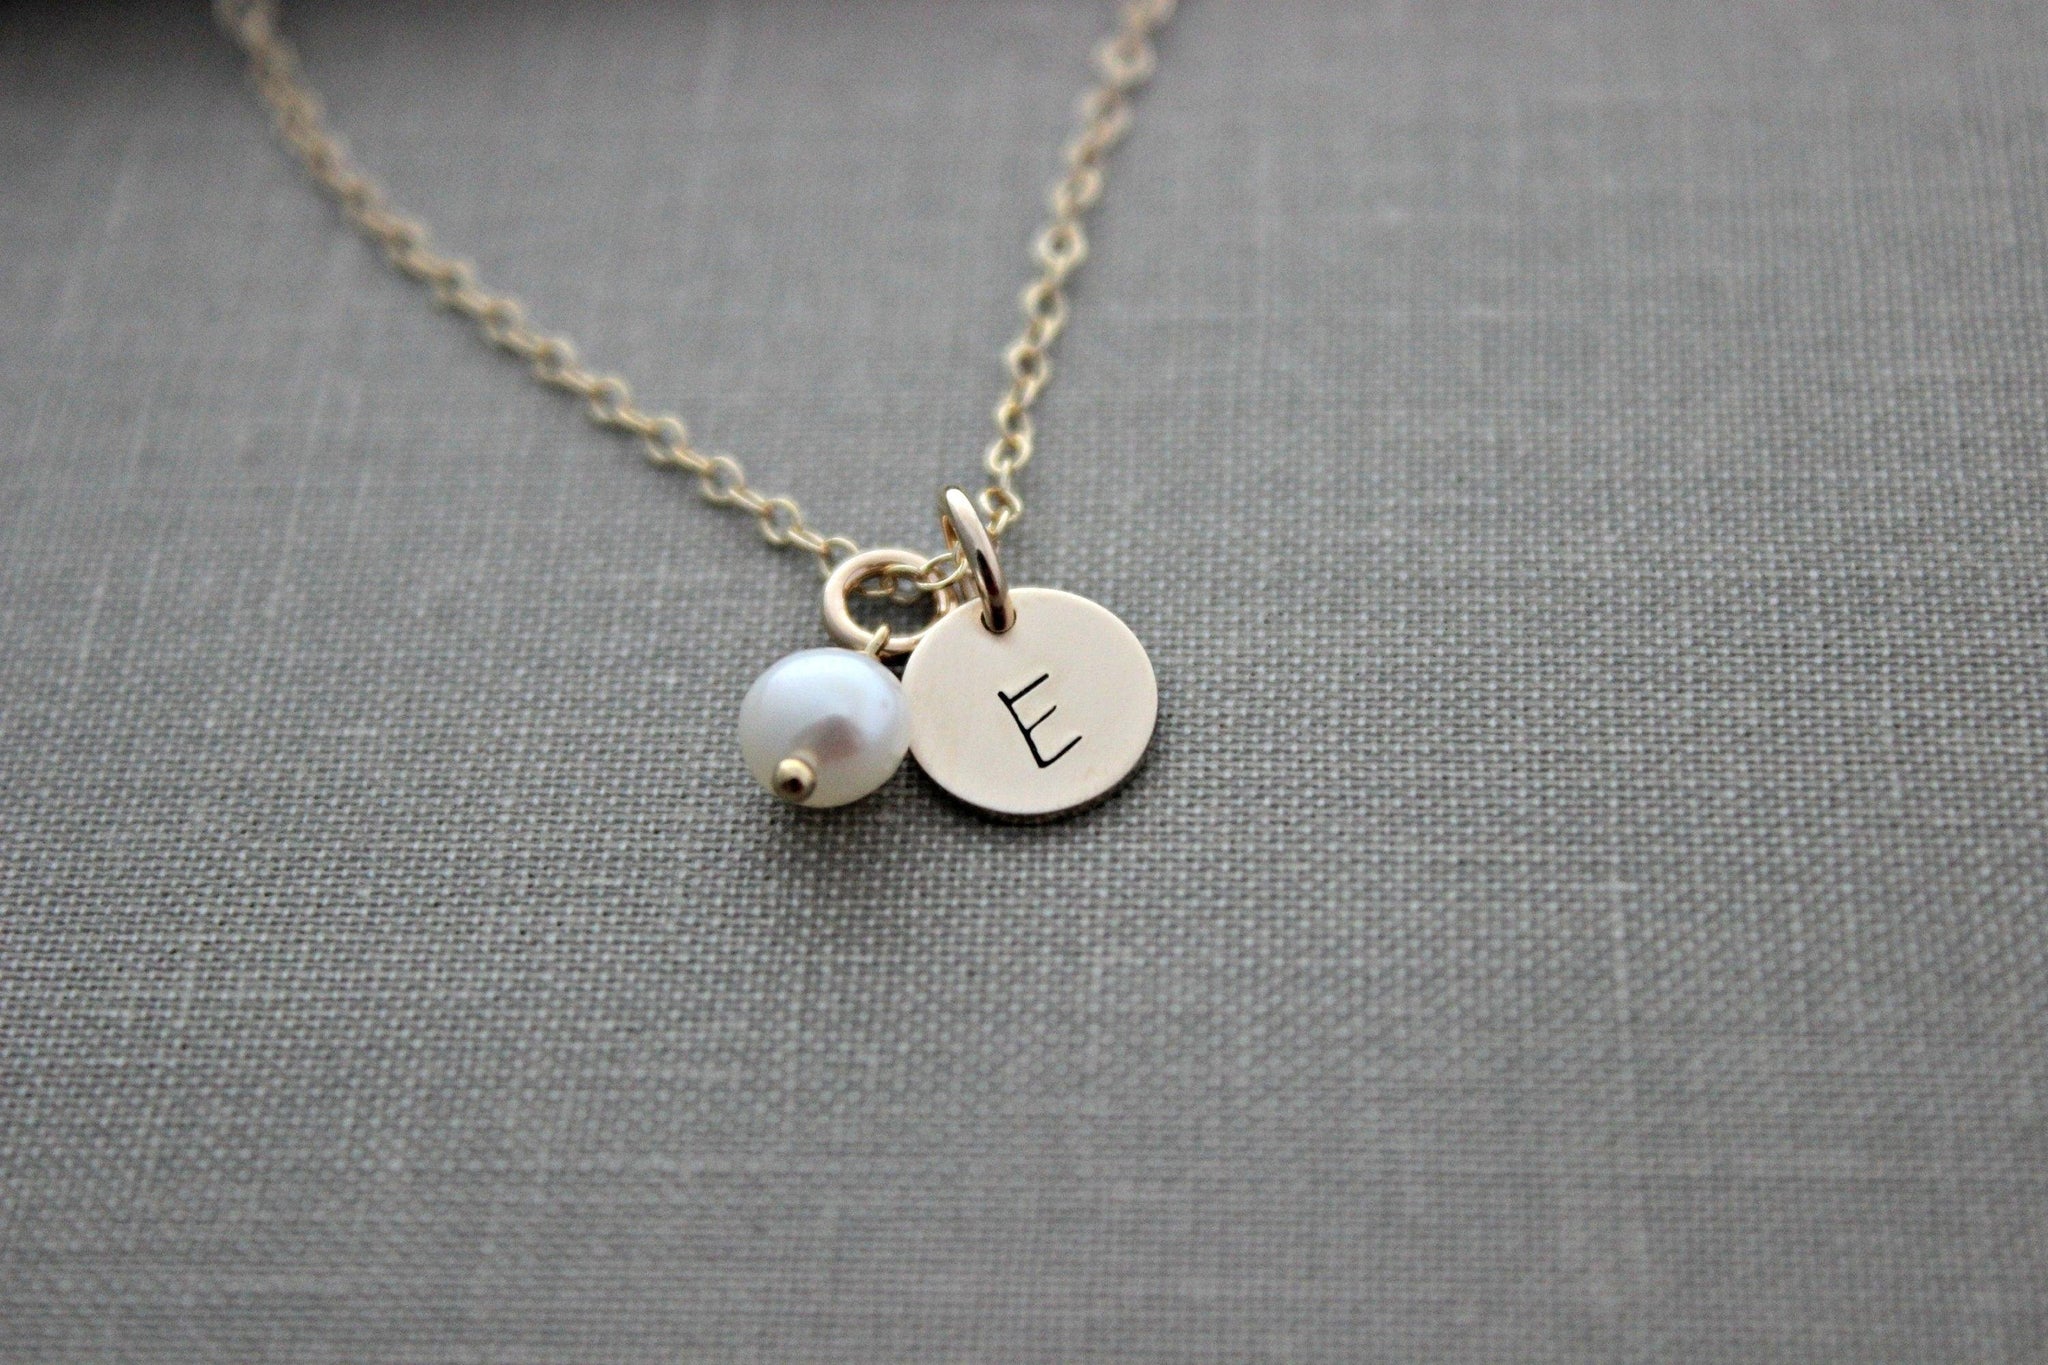 14k Gold filled initial necklace with white pearl - Monogram necklace –  Beach Cove Jewelry